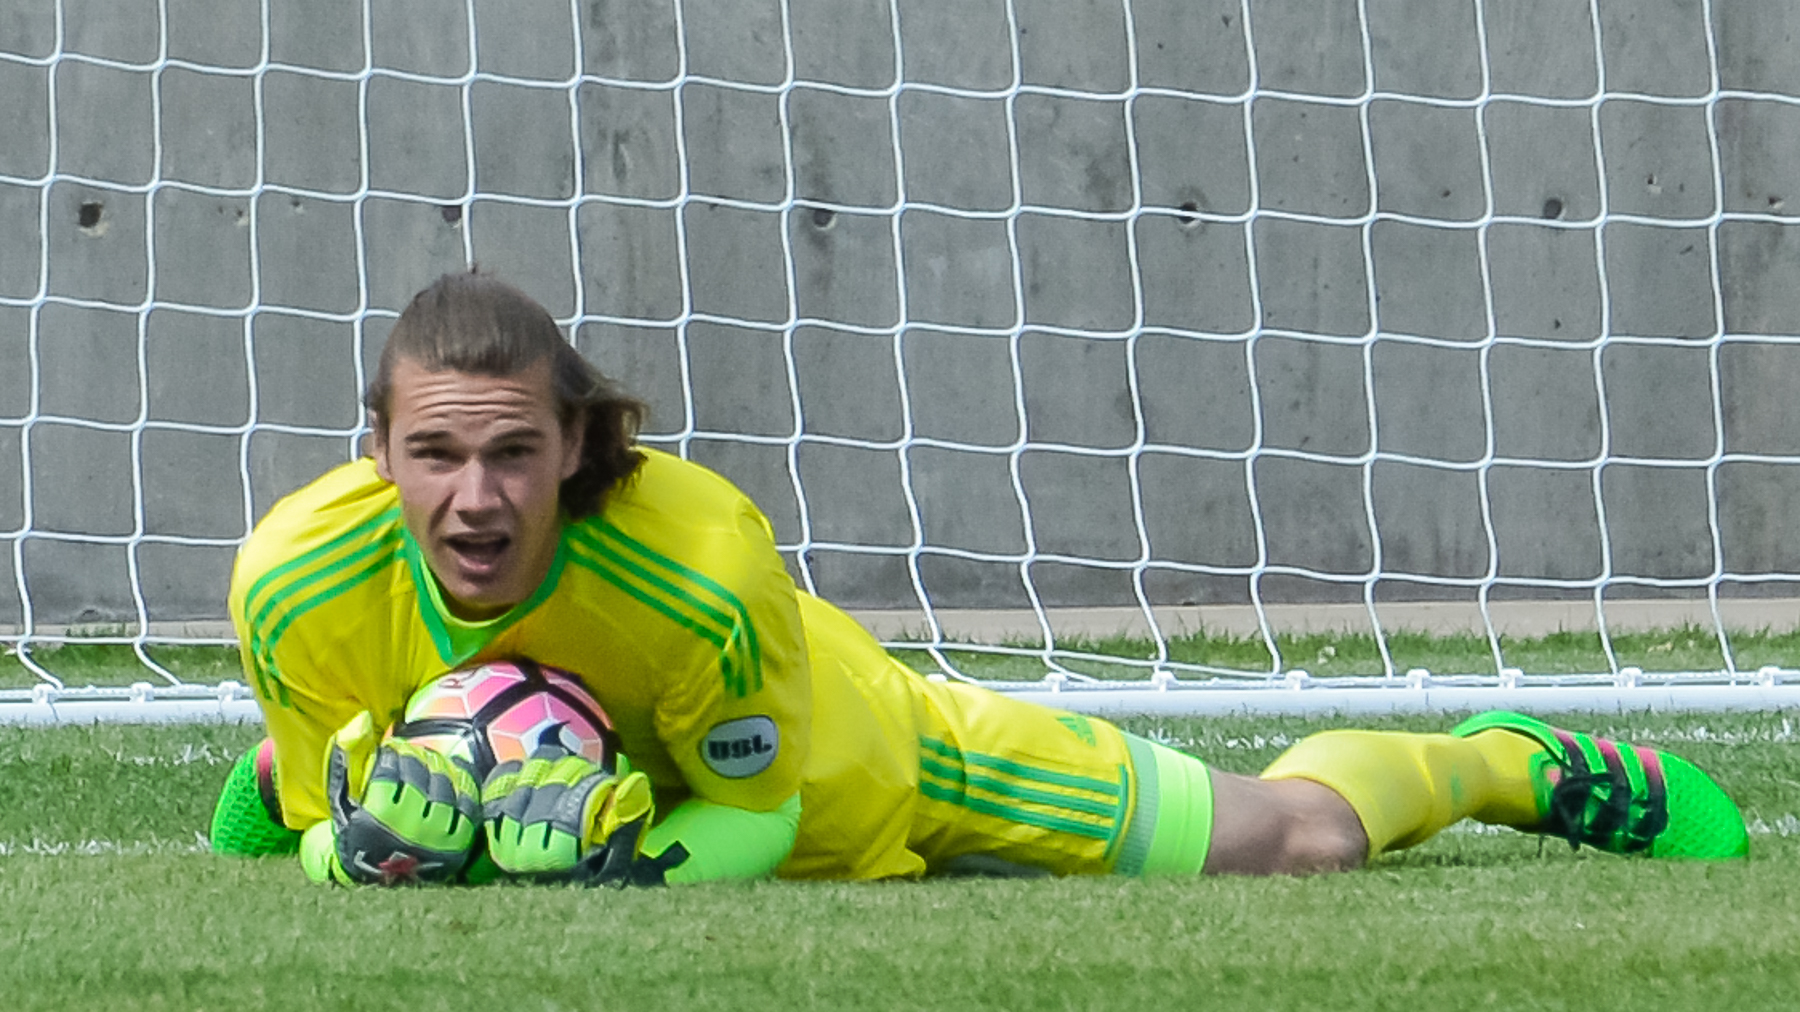 Connor Sparrow, Real Monarchs goalkeeper